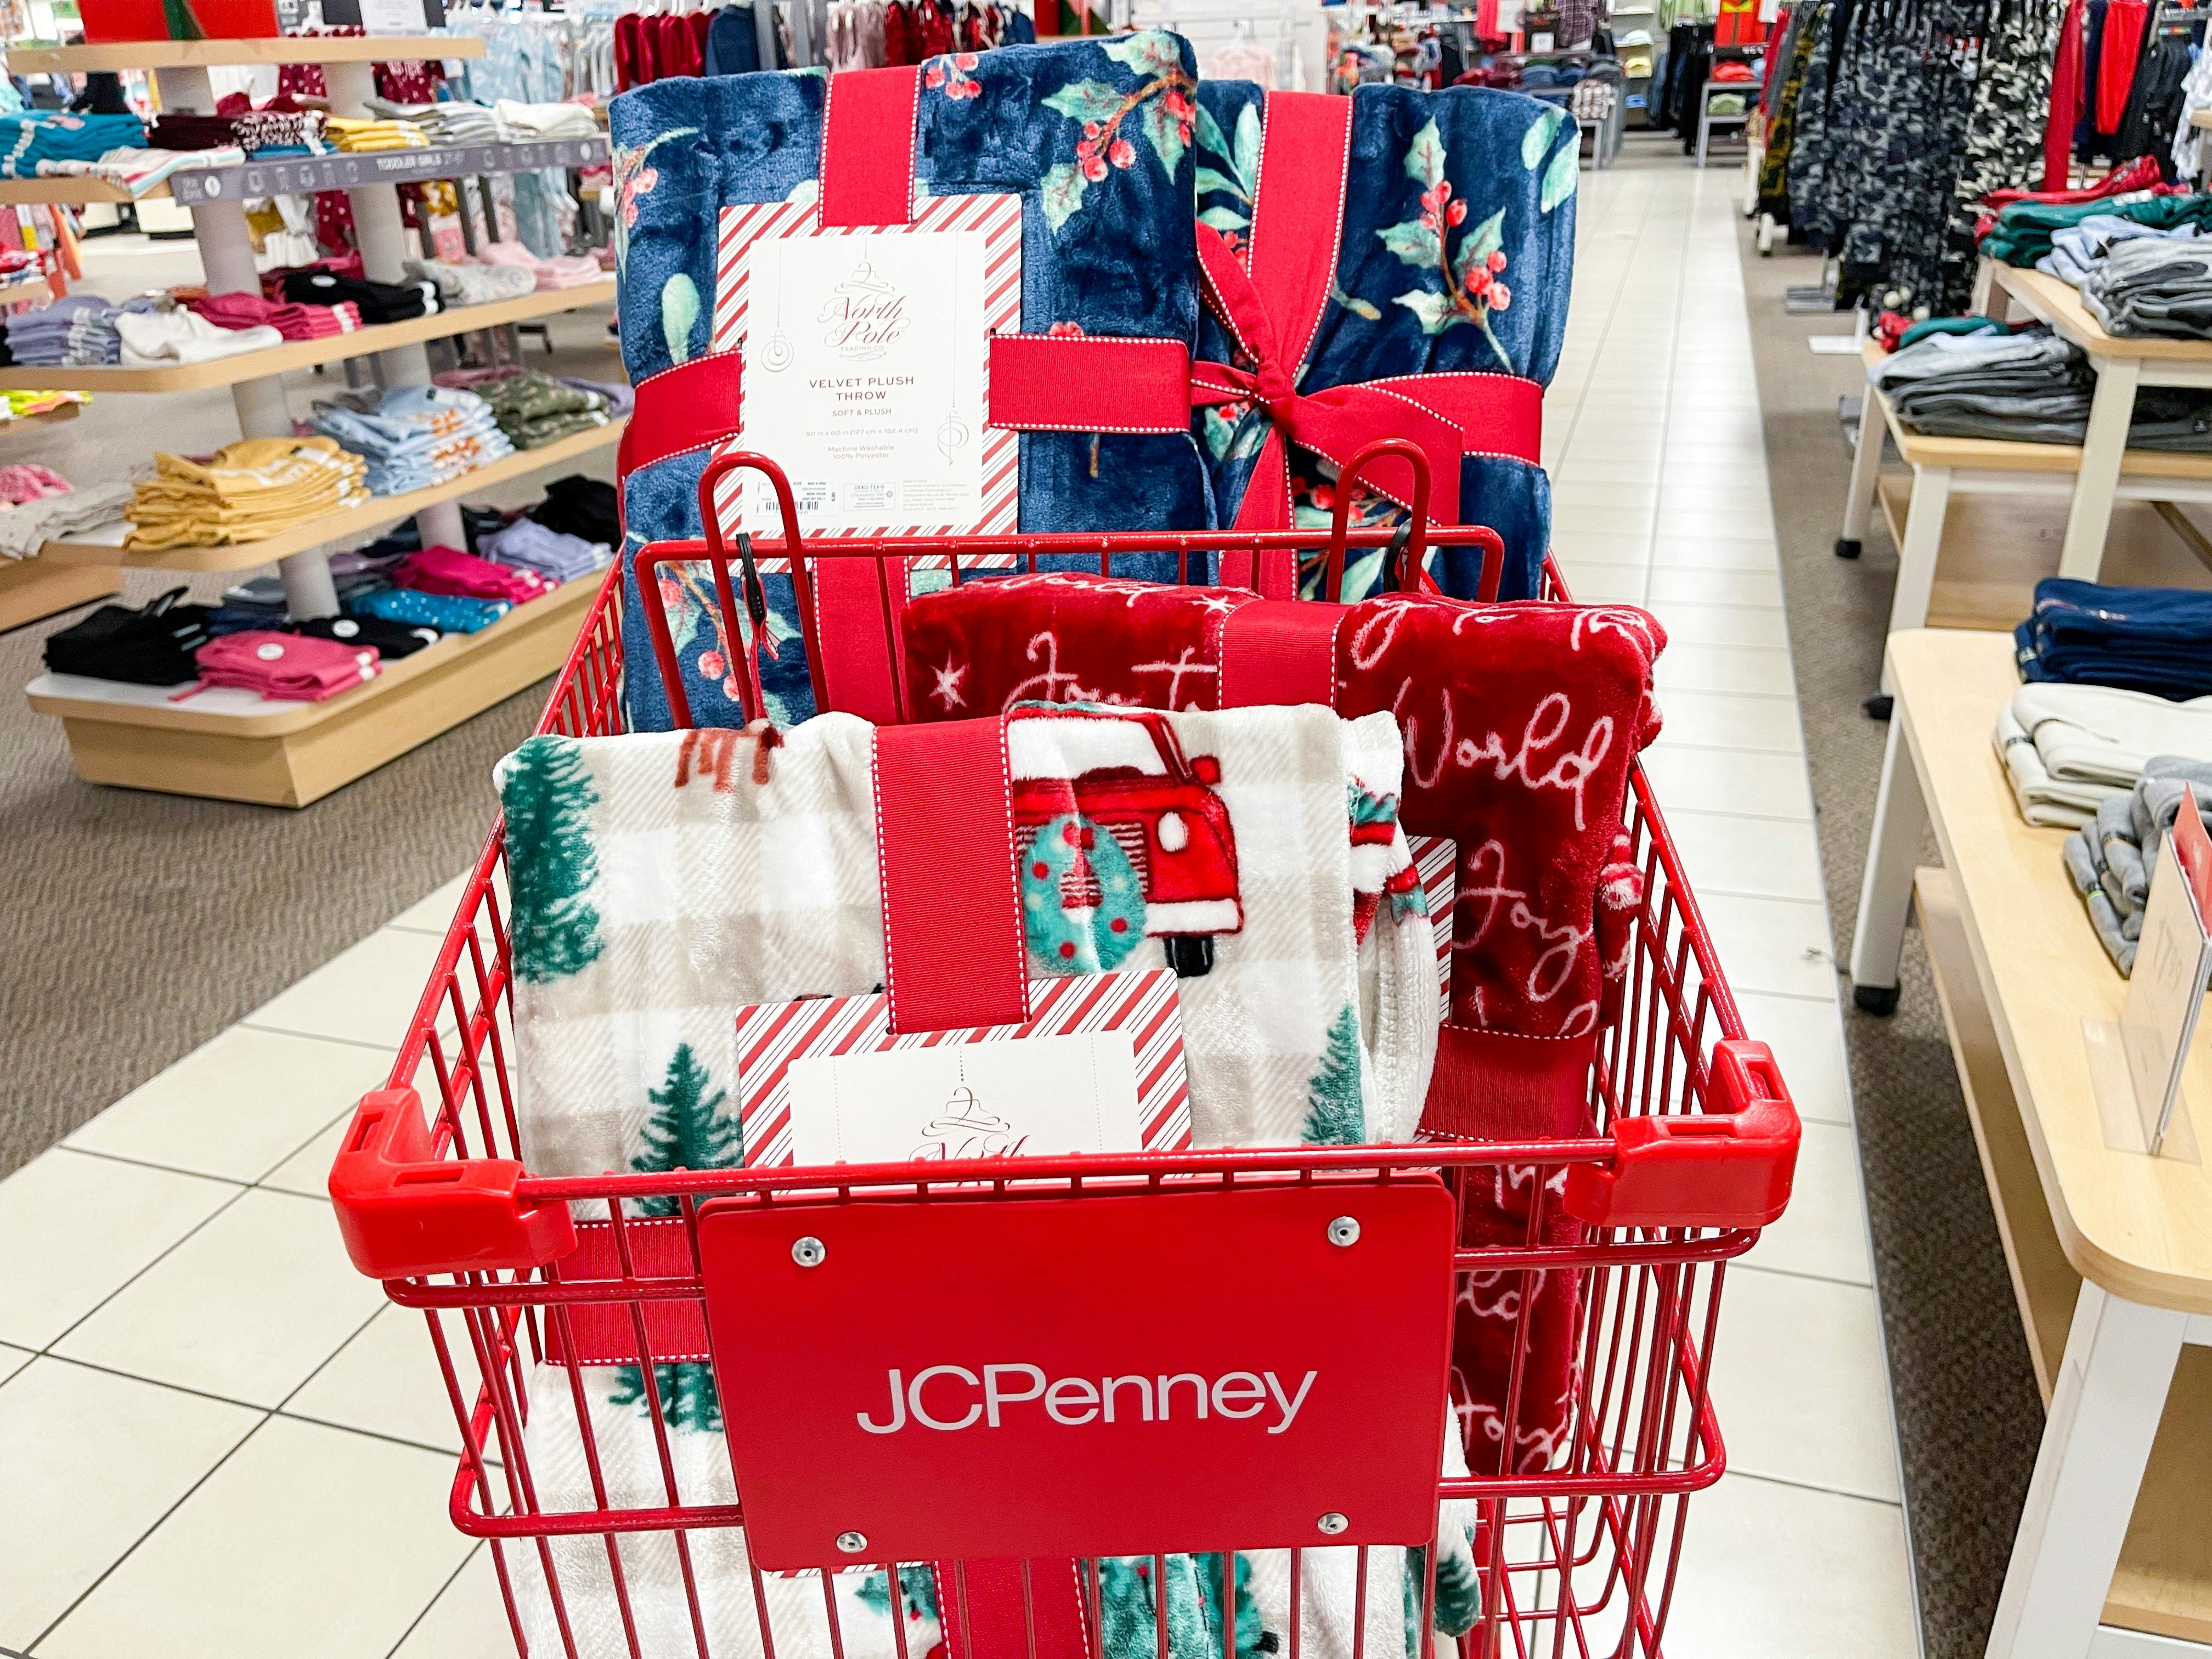 How To Get JCPenney Discount Coupons?, by Silverandrison